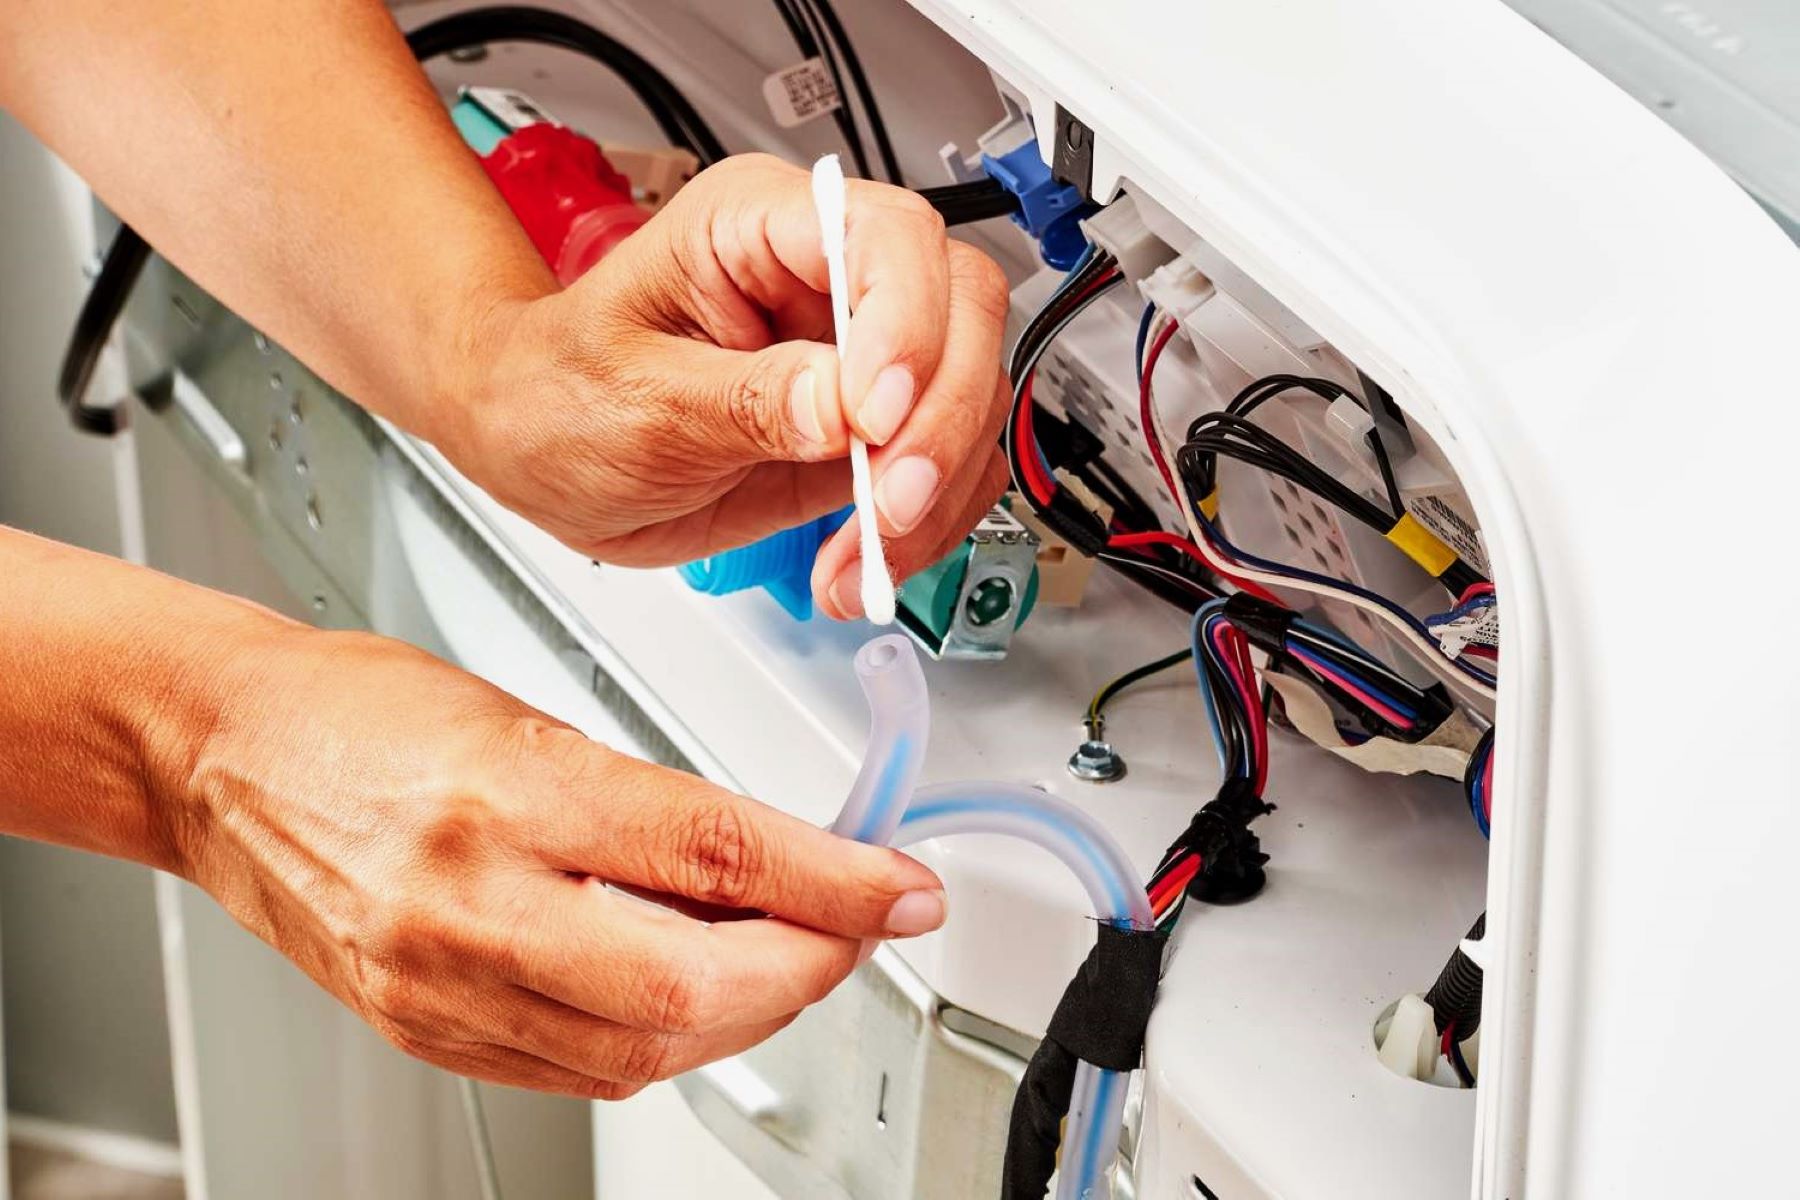 How To Check The Water Level Sensor In A Washing Machine